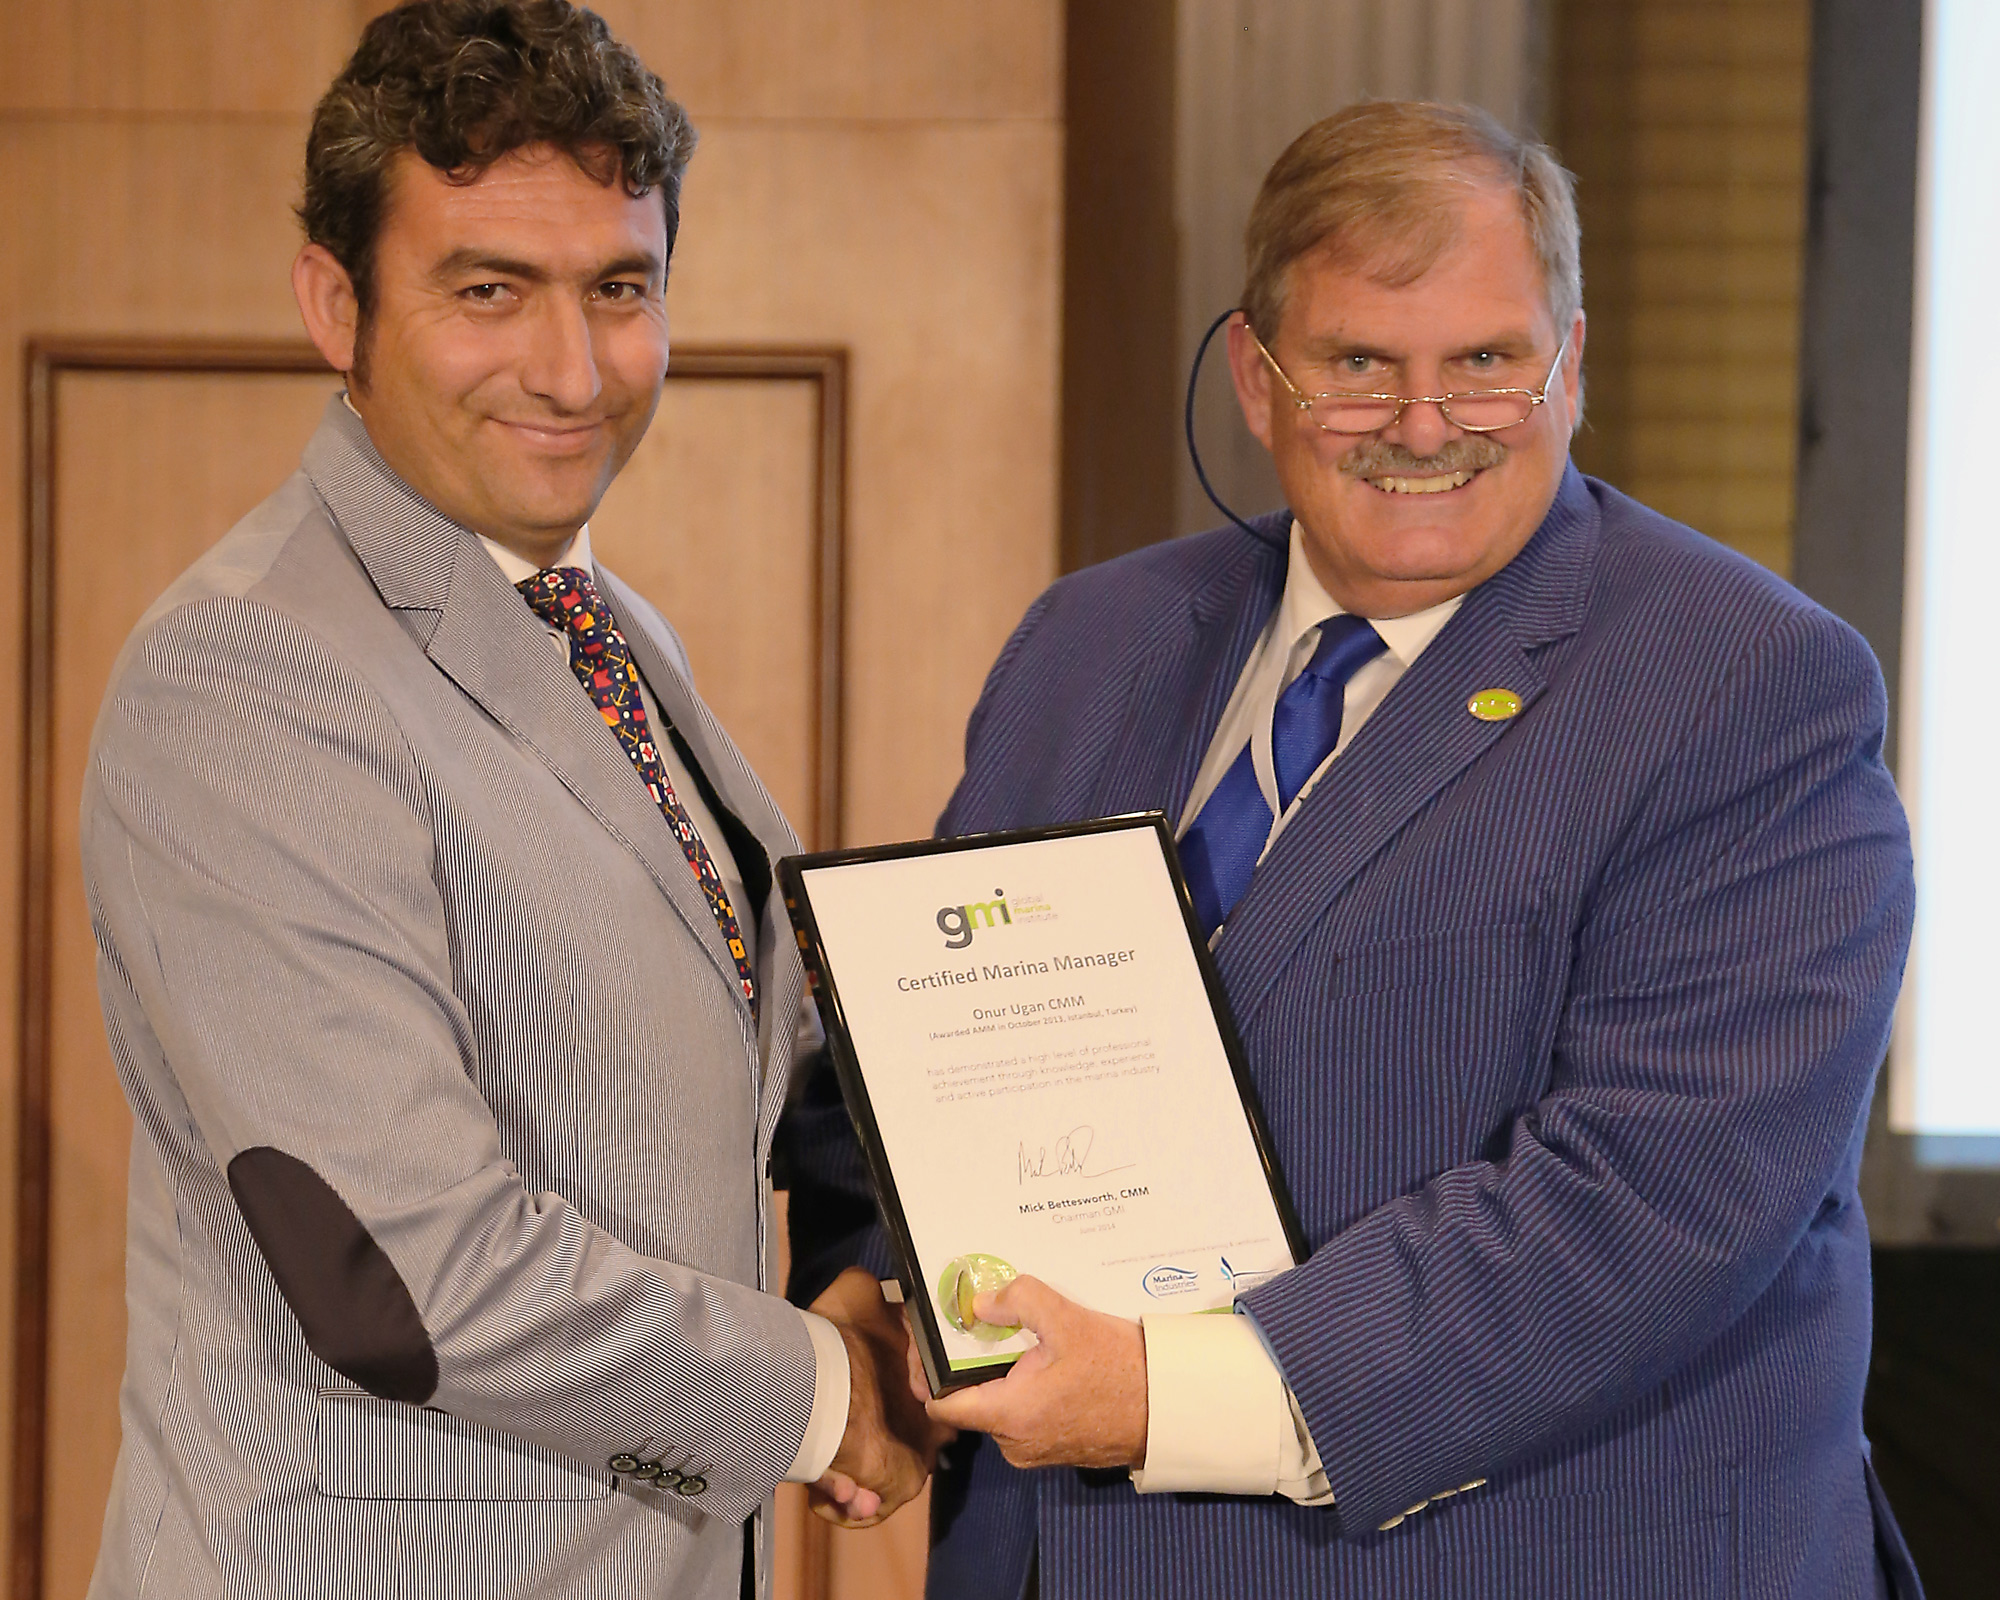 GMI Chairman presents CMM certificates at World Marina Conference.